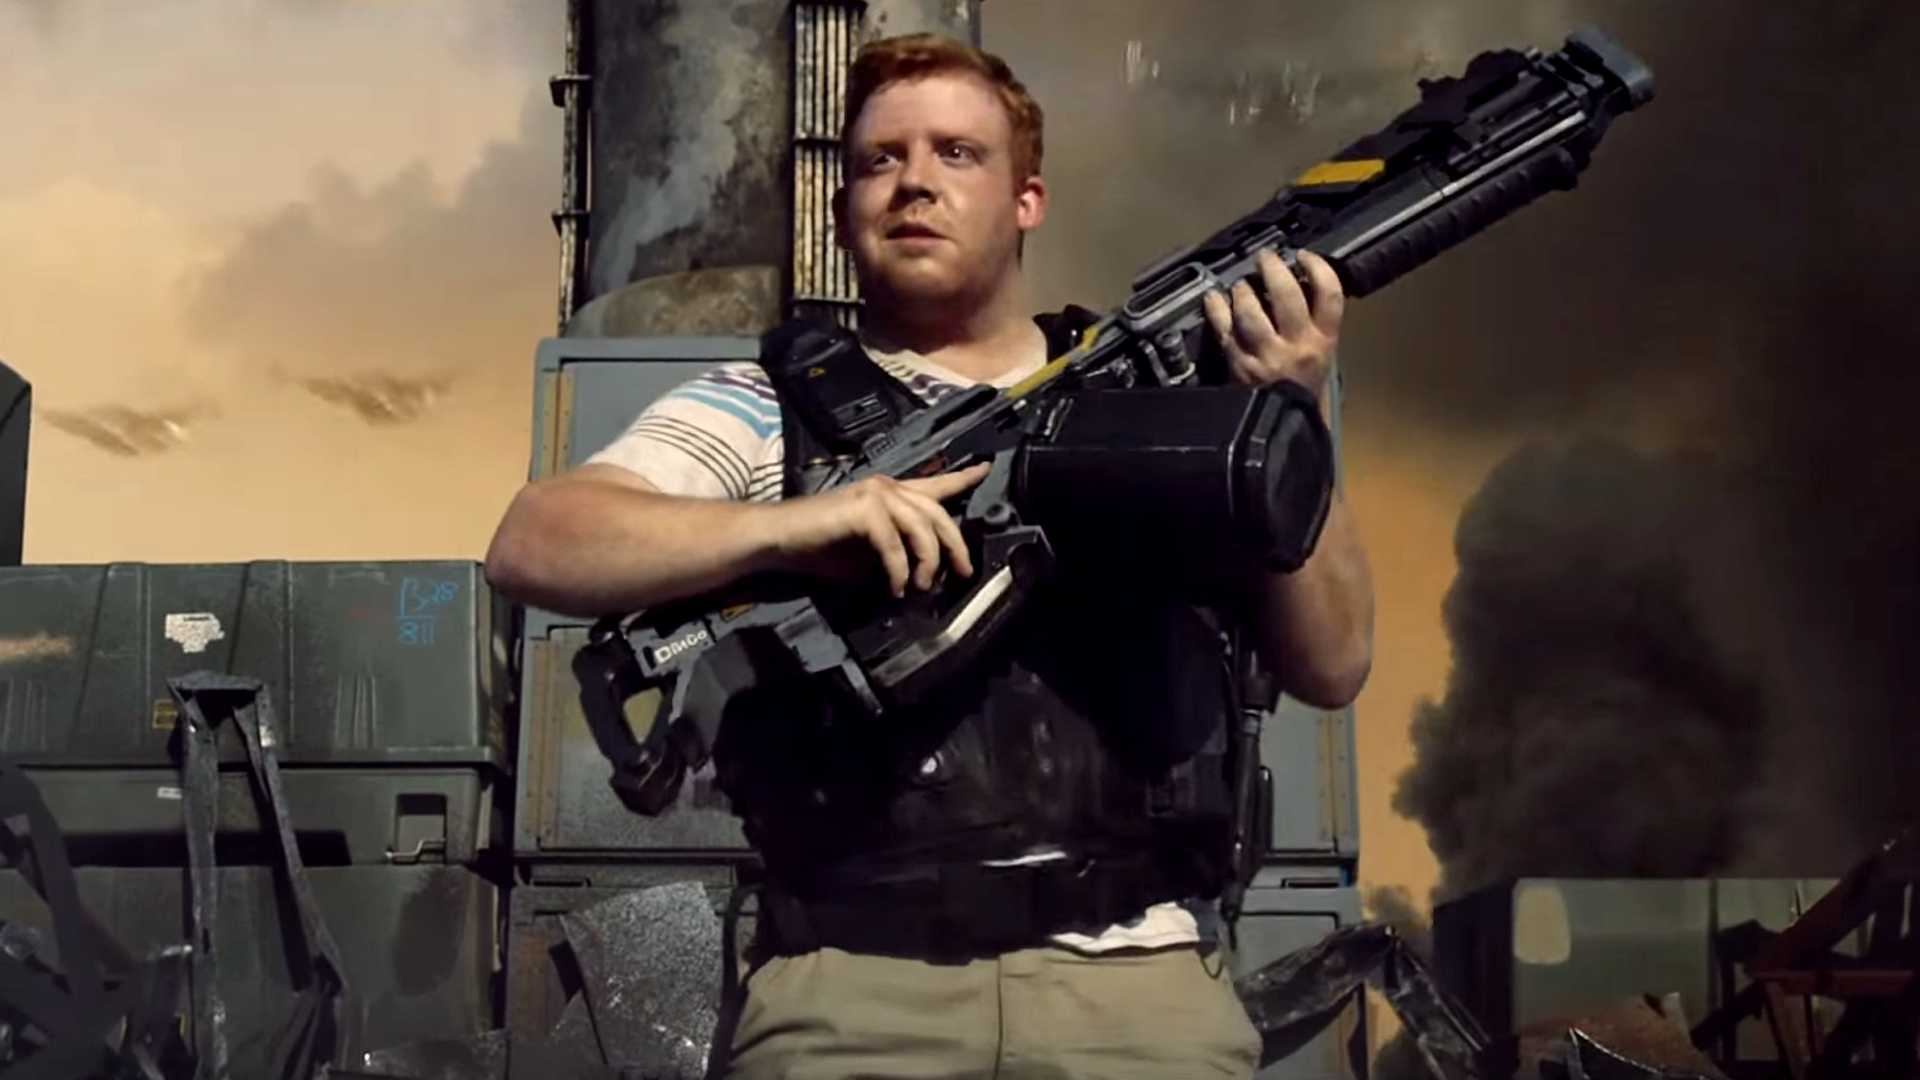 Call of Duty releases live-action trailer for Modern Warfare 3